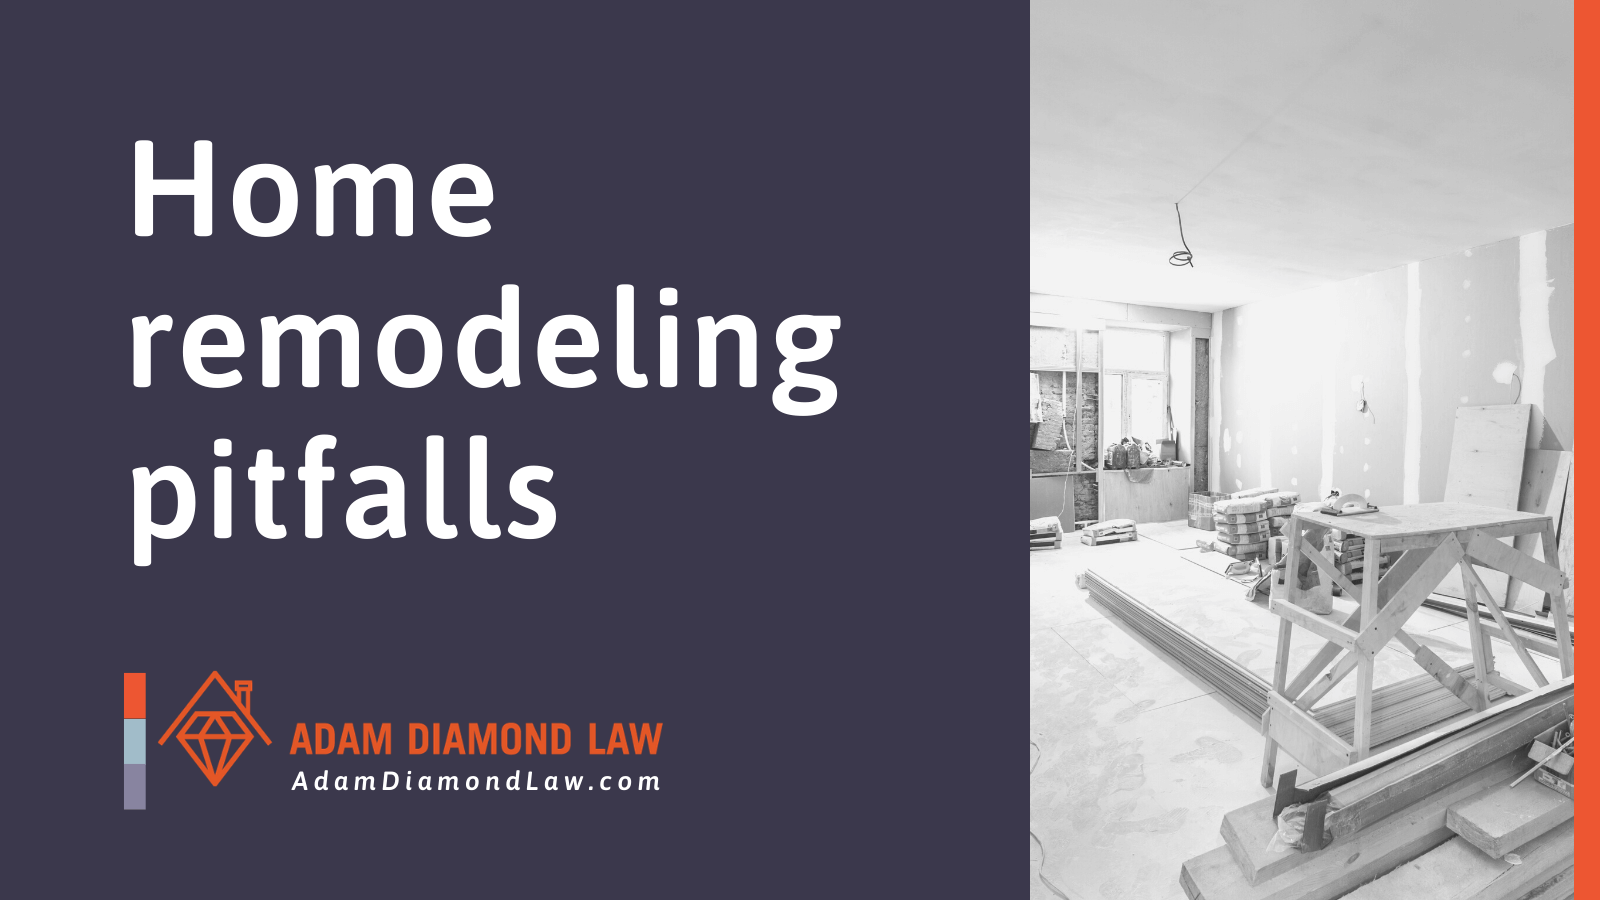 Home remodeling pitfalls - Adam Diamond Law | McHenry, IL Residential Real Estate Lawyer